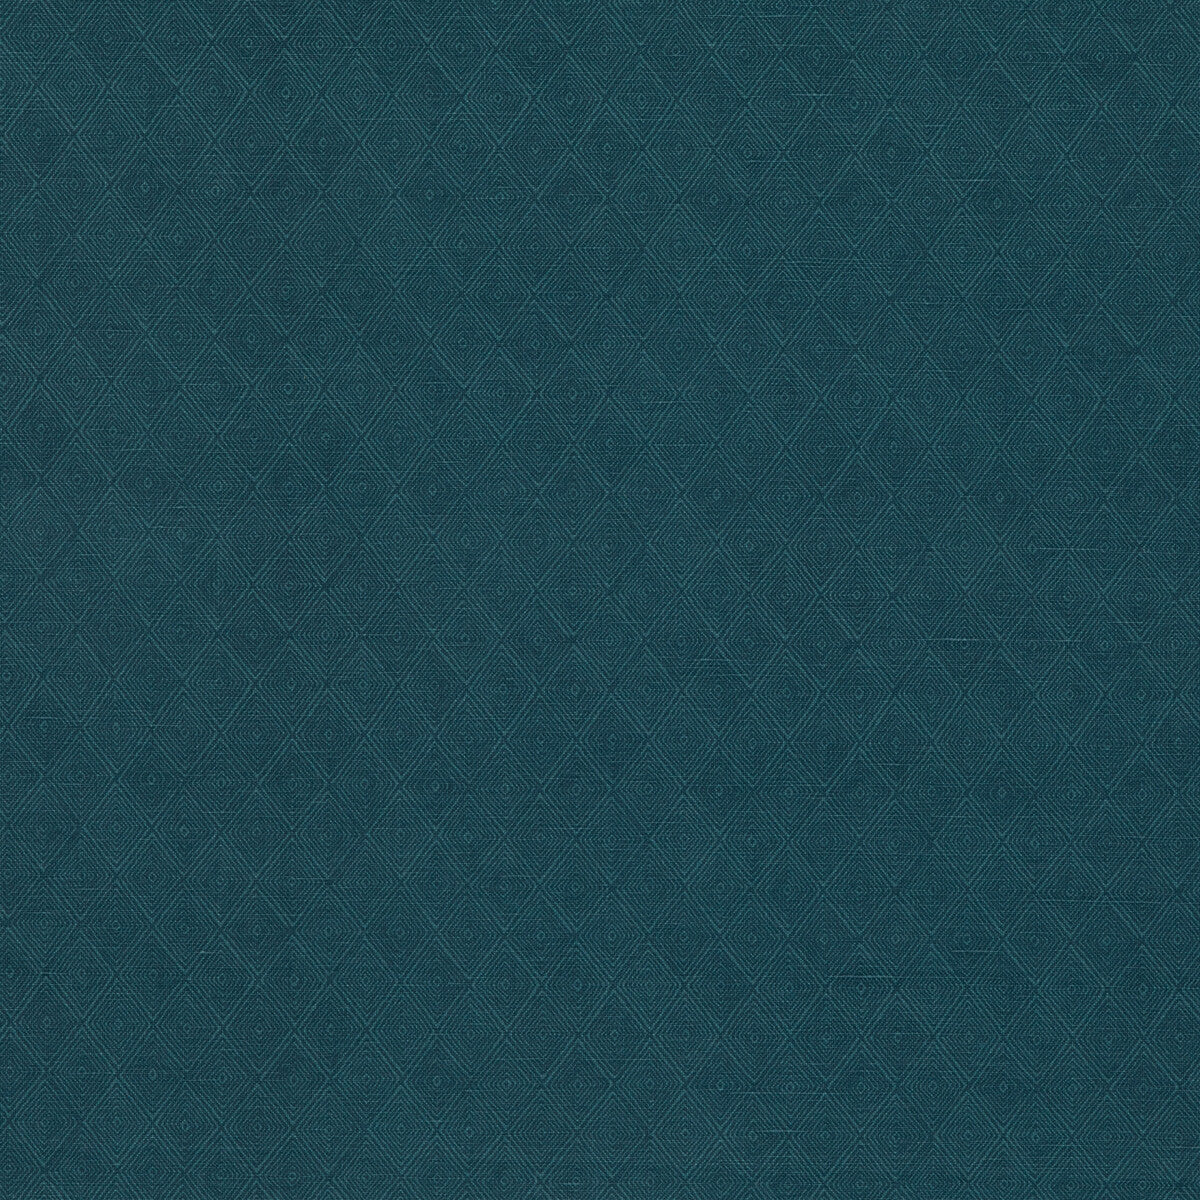 Boundary fabric in teal color - pattern ED75042.1.0 - by Threads in the Nala Prints collection